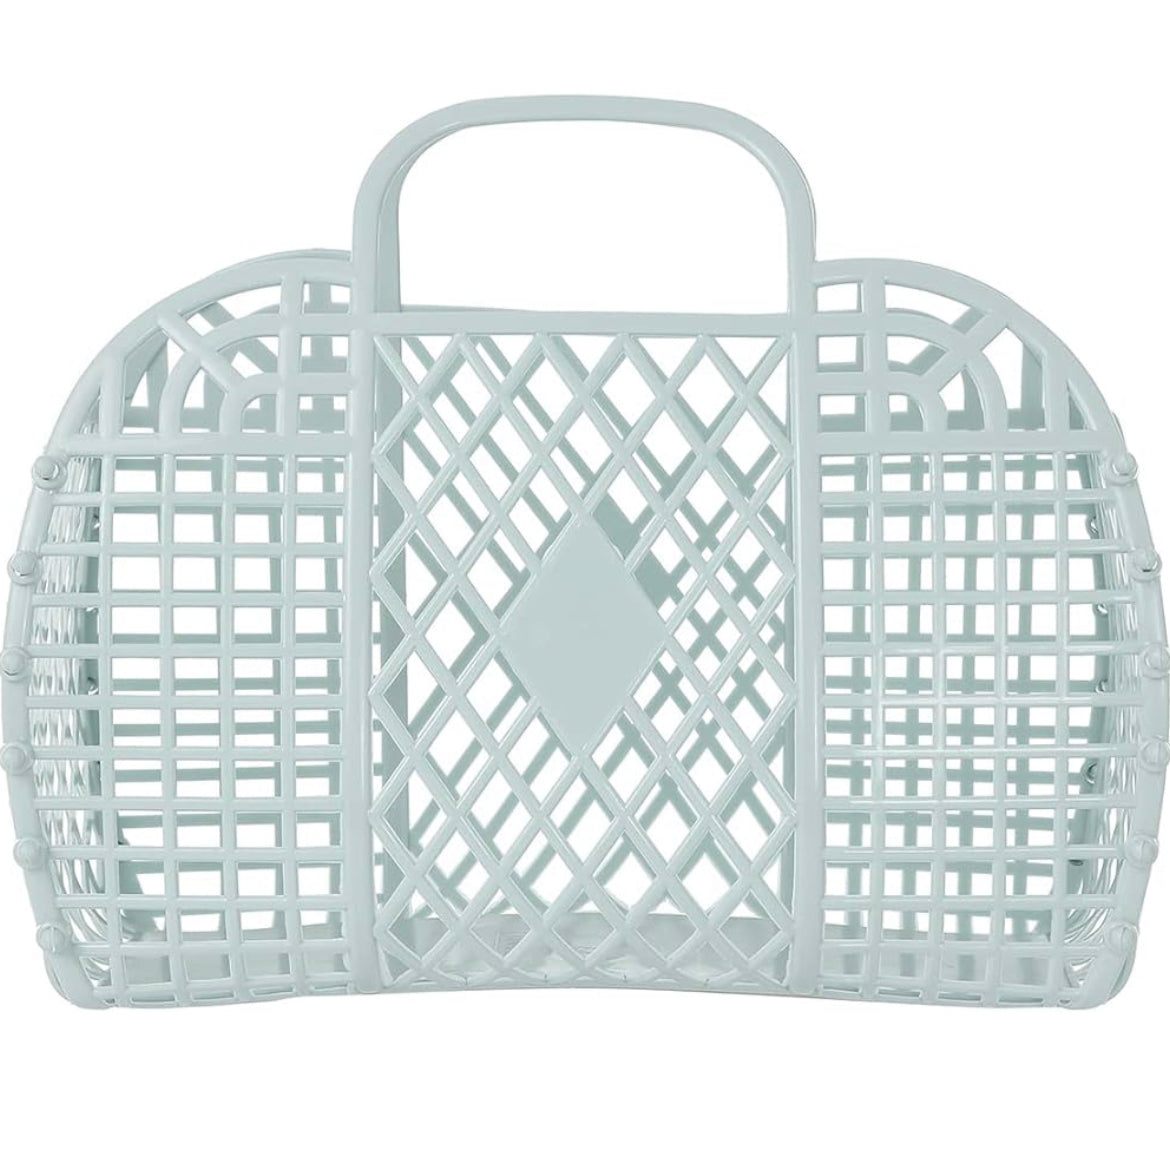 Jelly Basket -3 colours